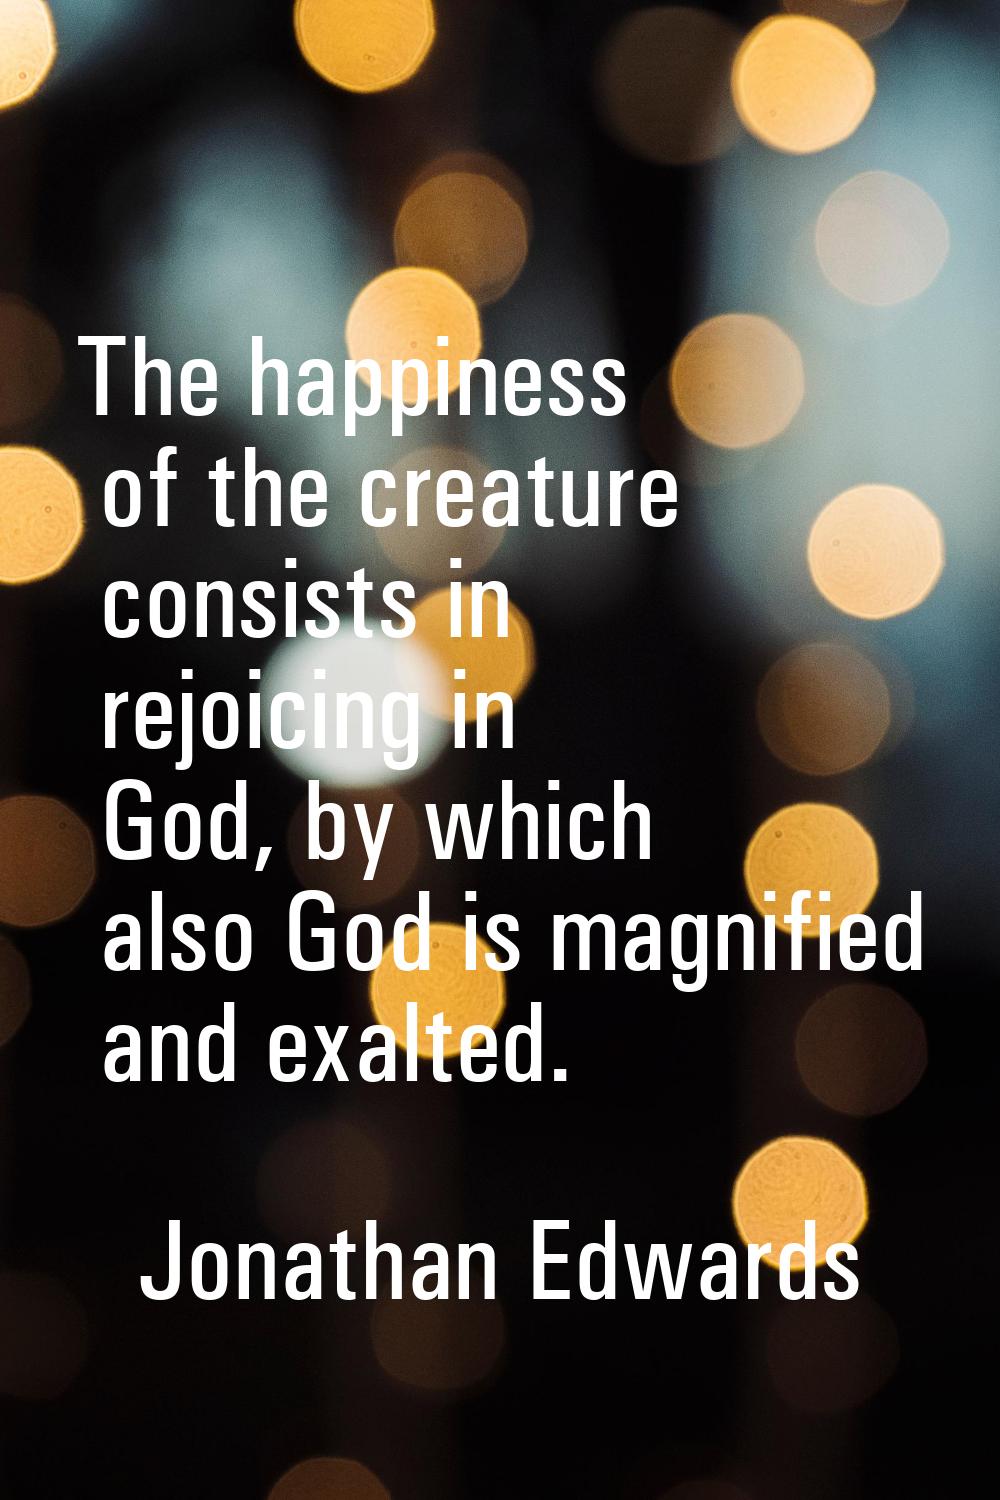 The happiness of the creature consists in rejoicing in God, by which also God is magnified and exal